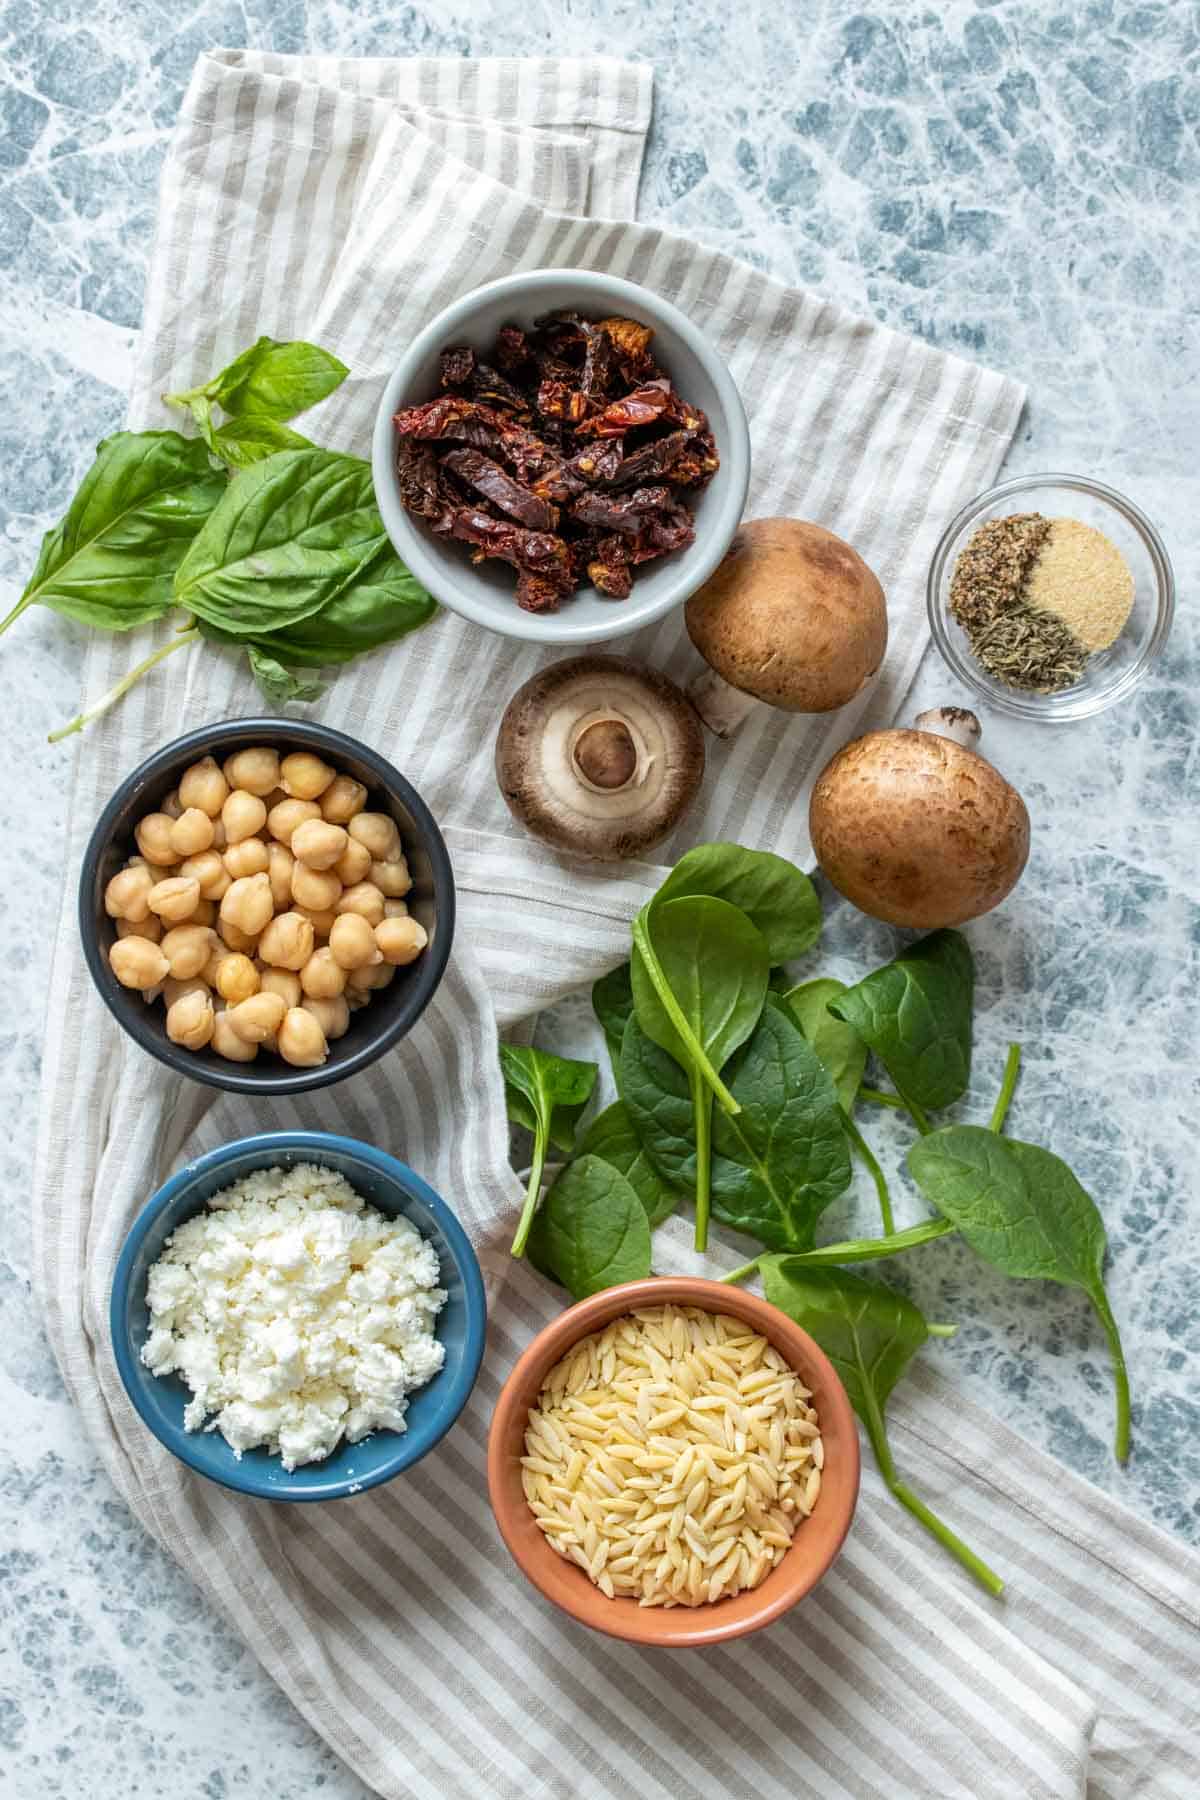 Top view of ingredients needed to make a mediterranean themed orzo salad on a striped towel and in bowls